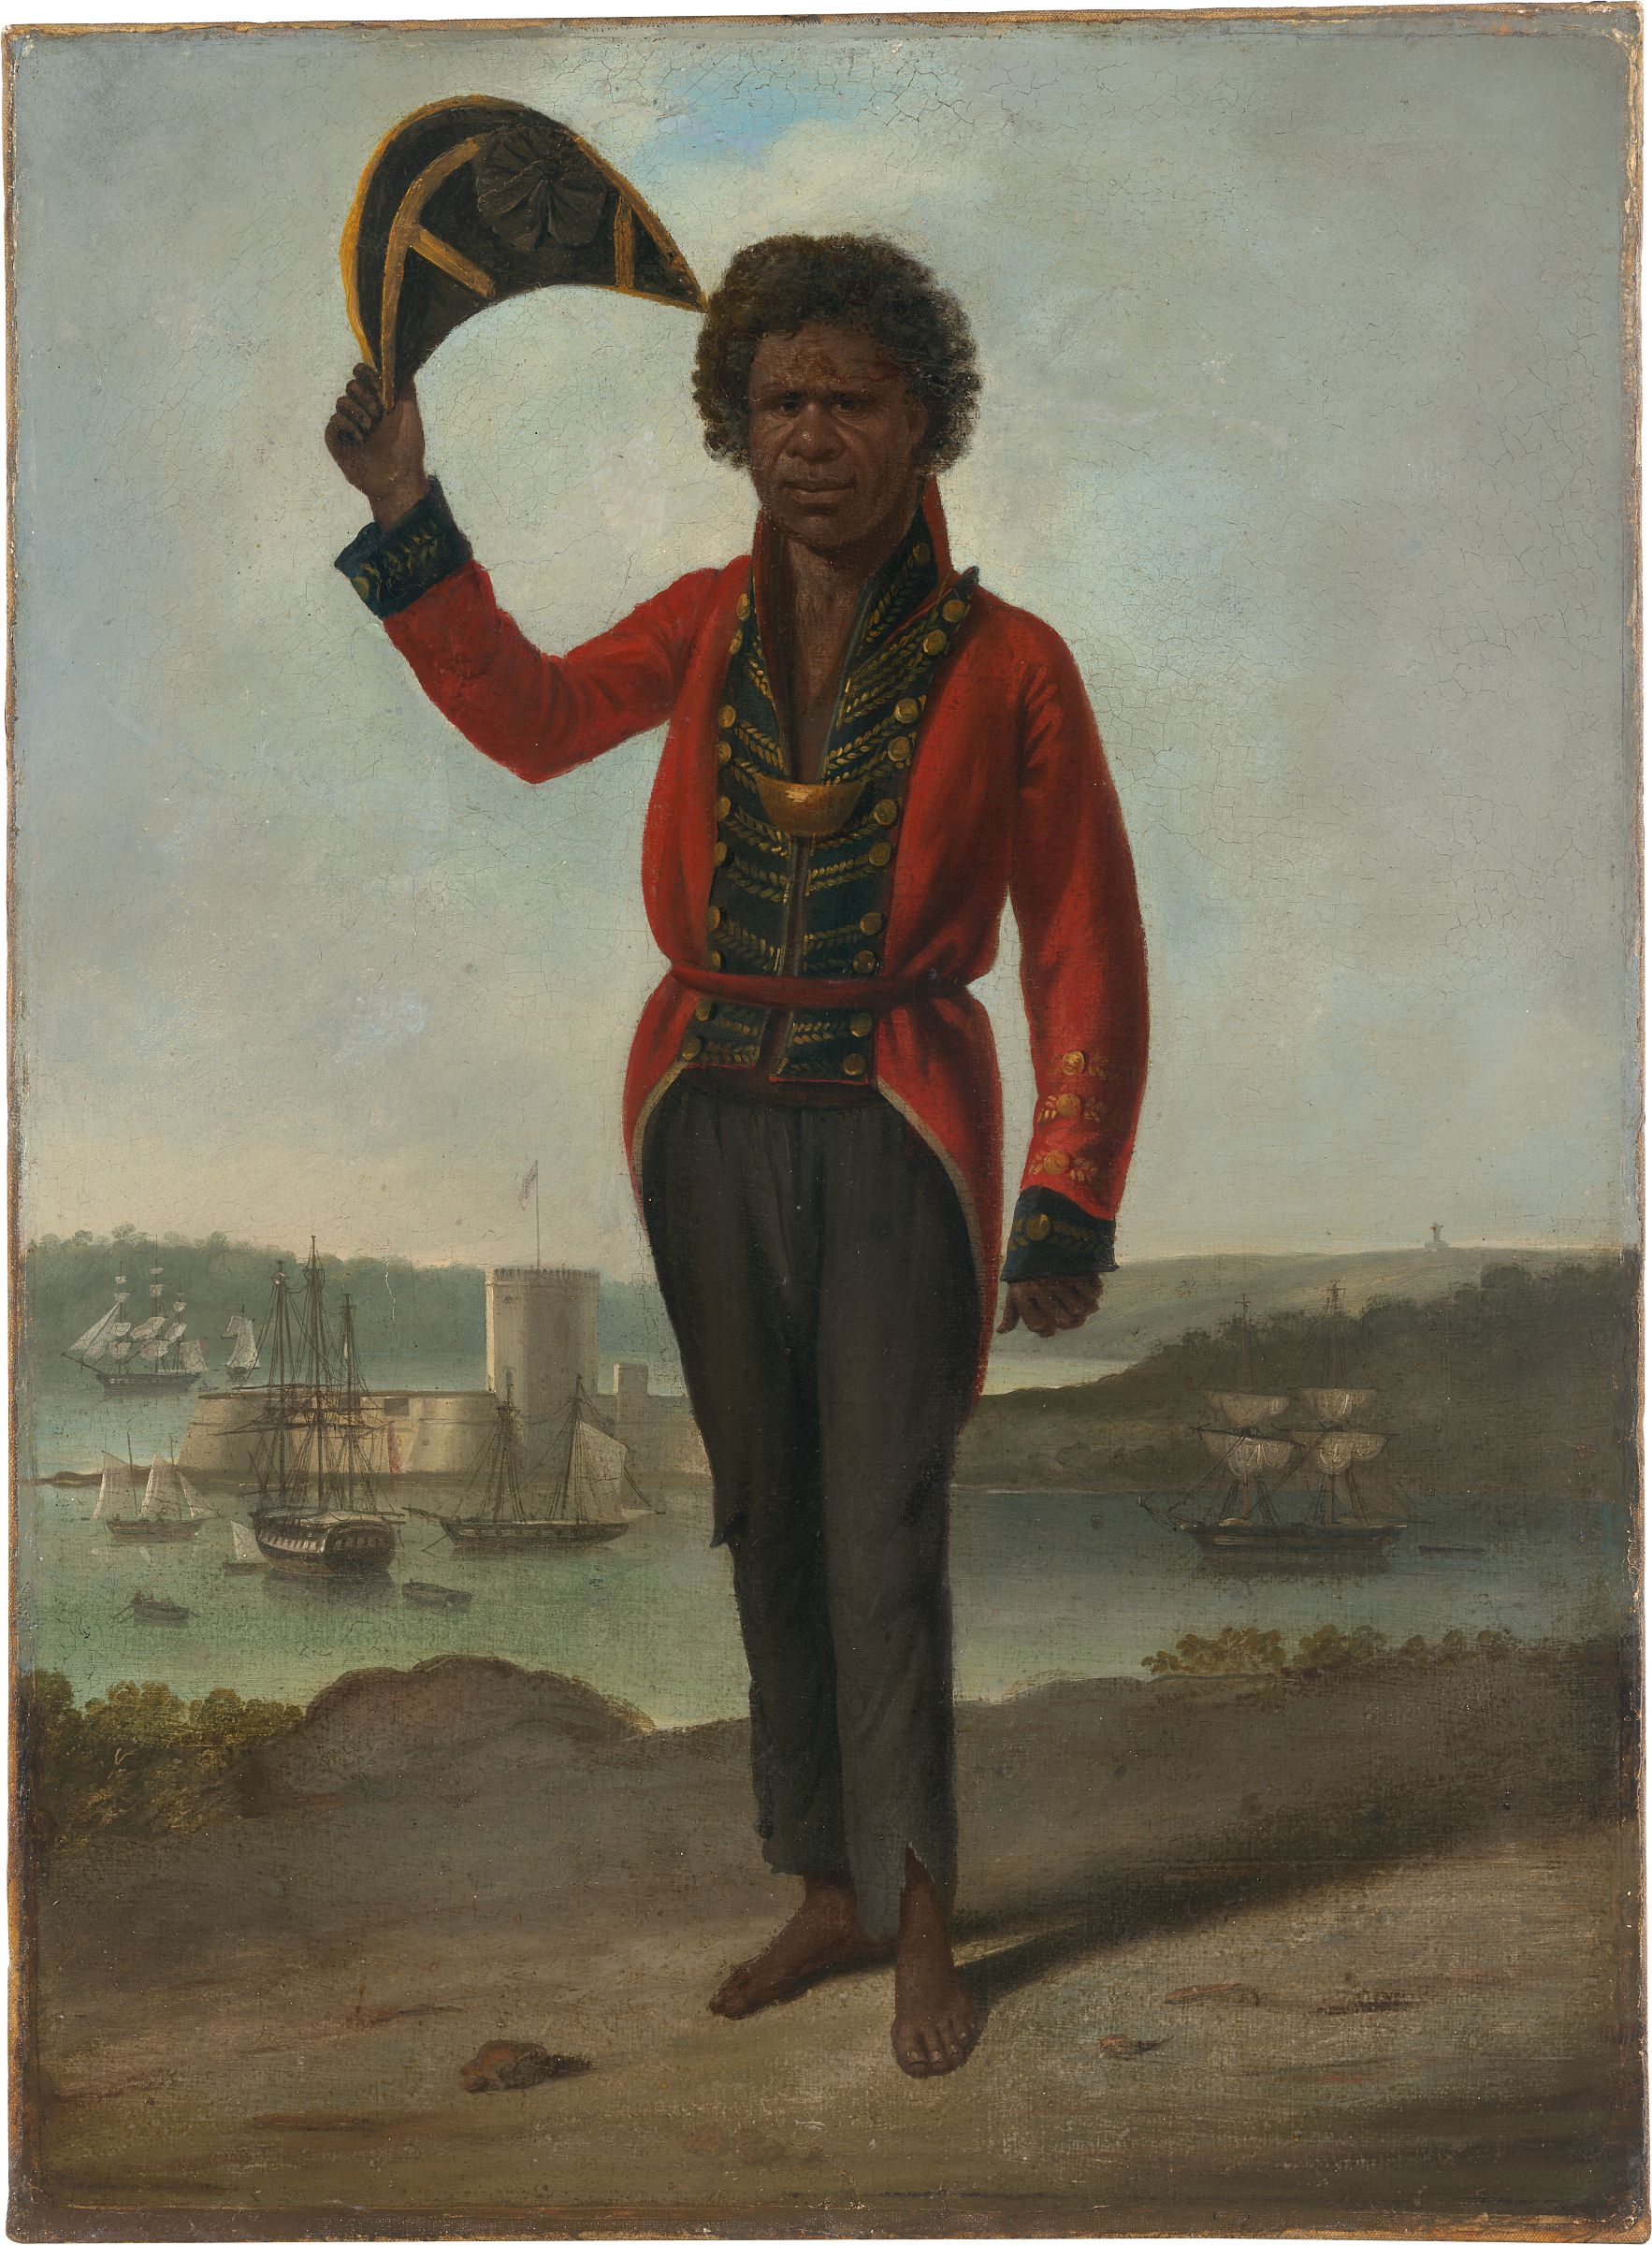 Portrait of Bungaree a native of New South Wales